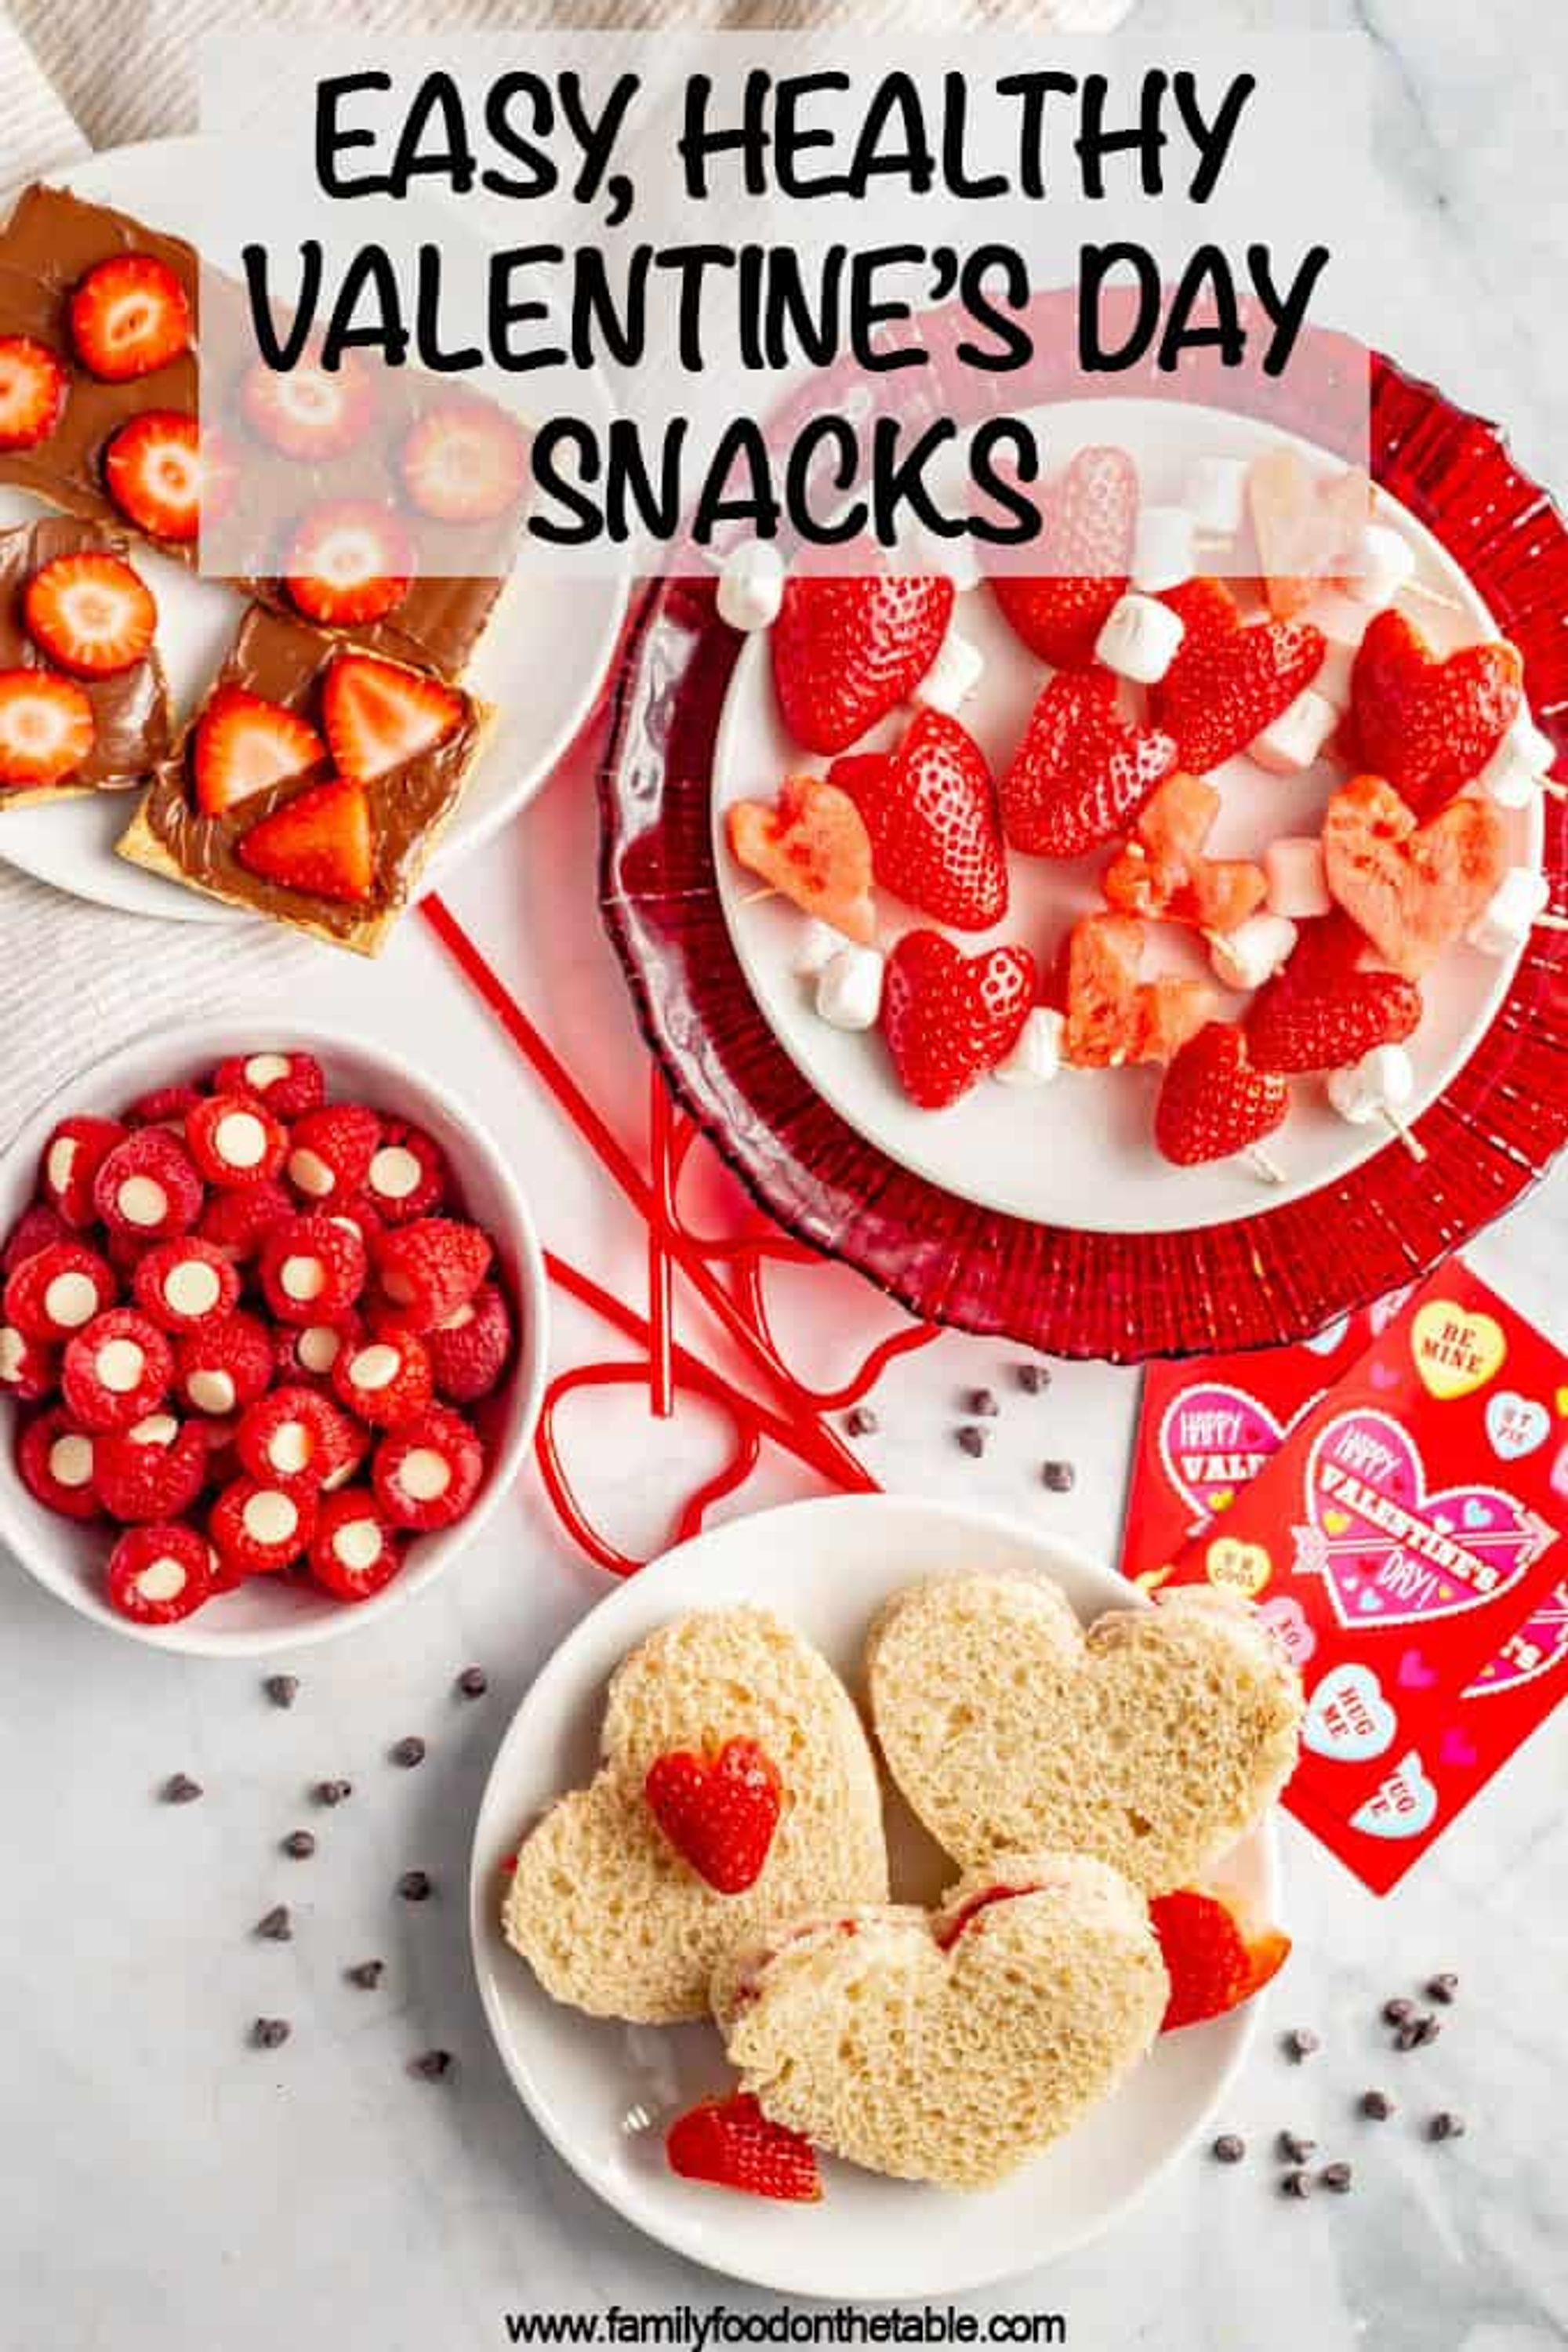 Healthy Valentine's Day Snacks 33 ideas Family Food on the Table My Recipe Magic